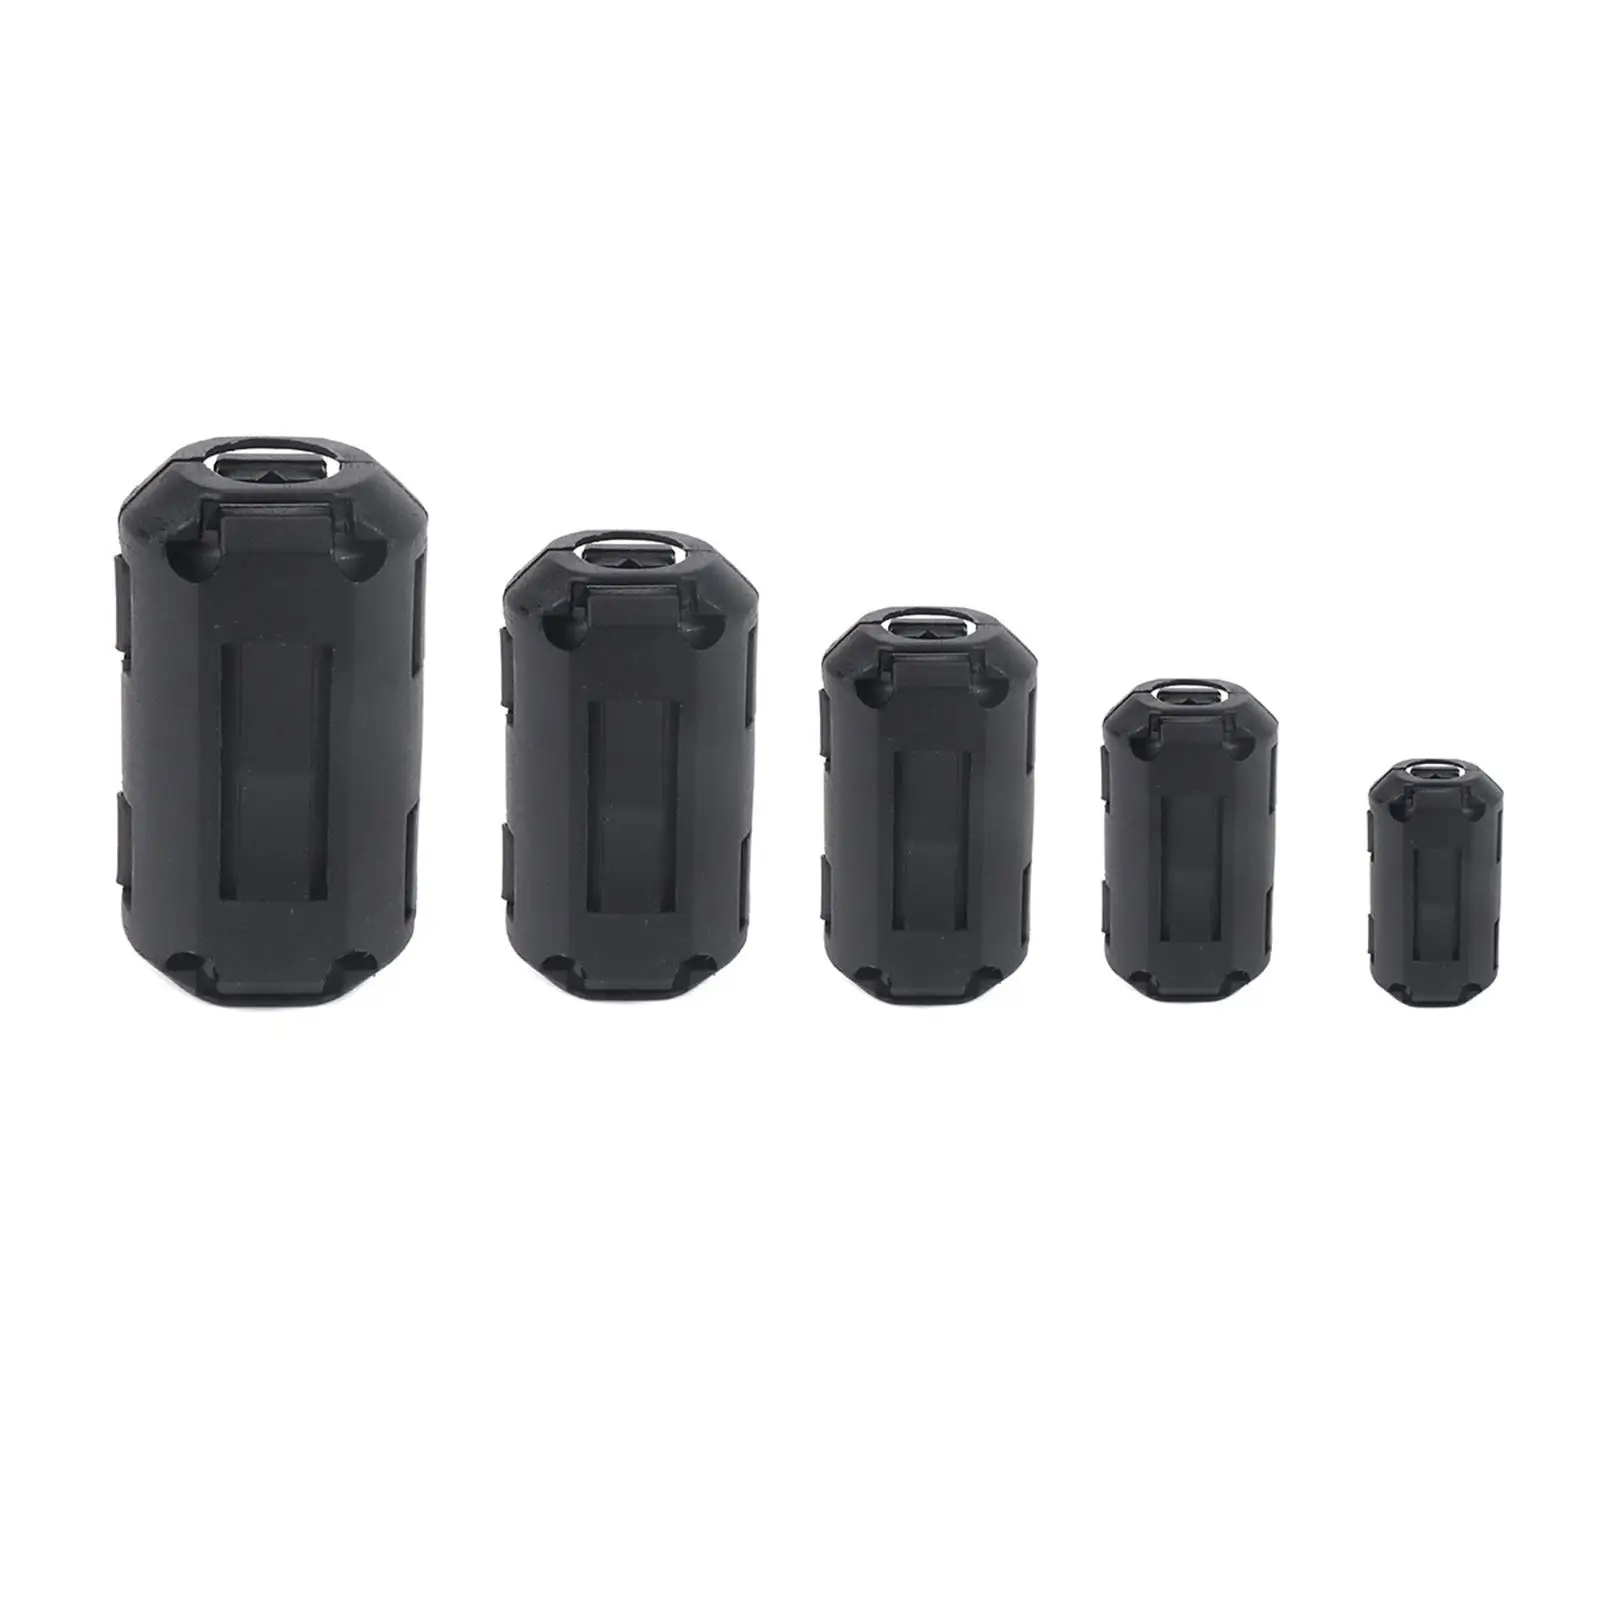 25x Clip On Ferrite Ring Core Kit Cable Clip Filter Fit for Car DVR Headset